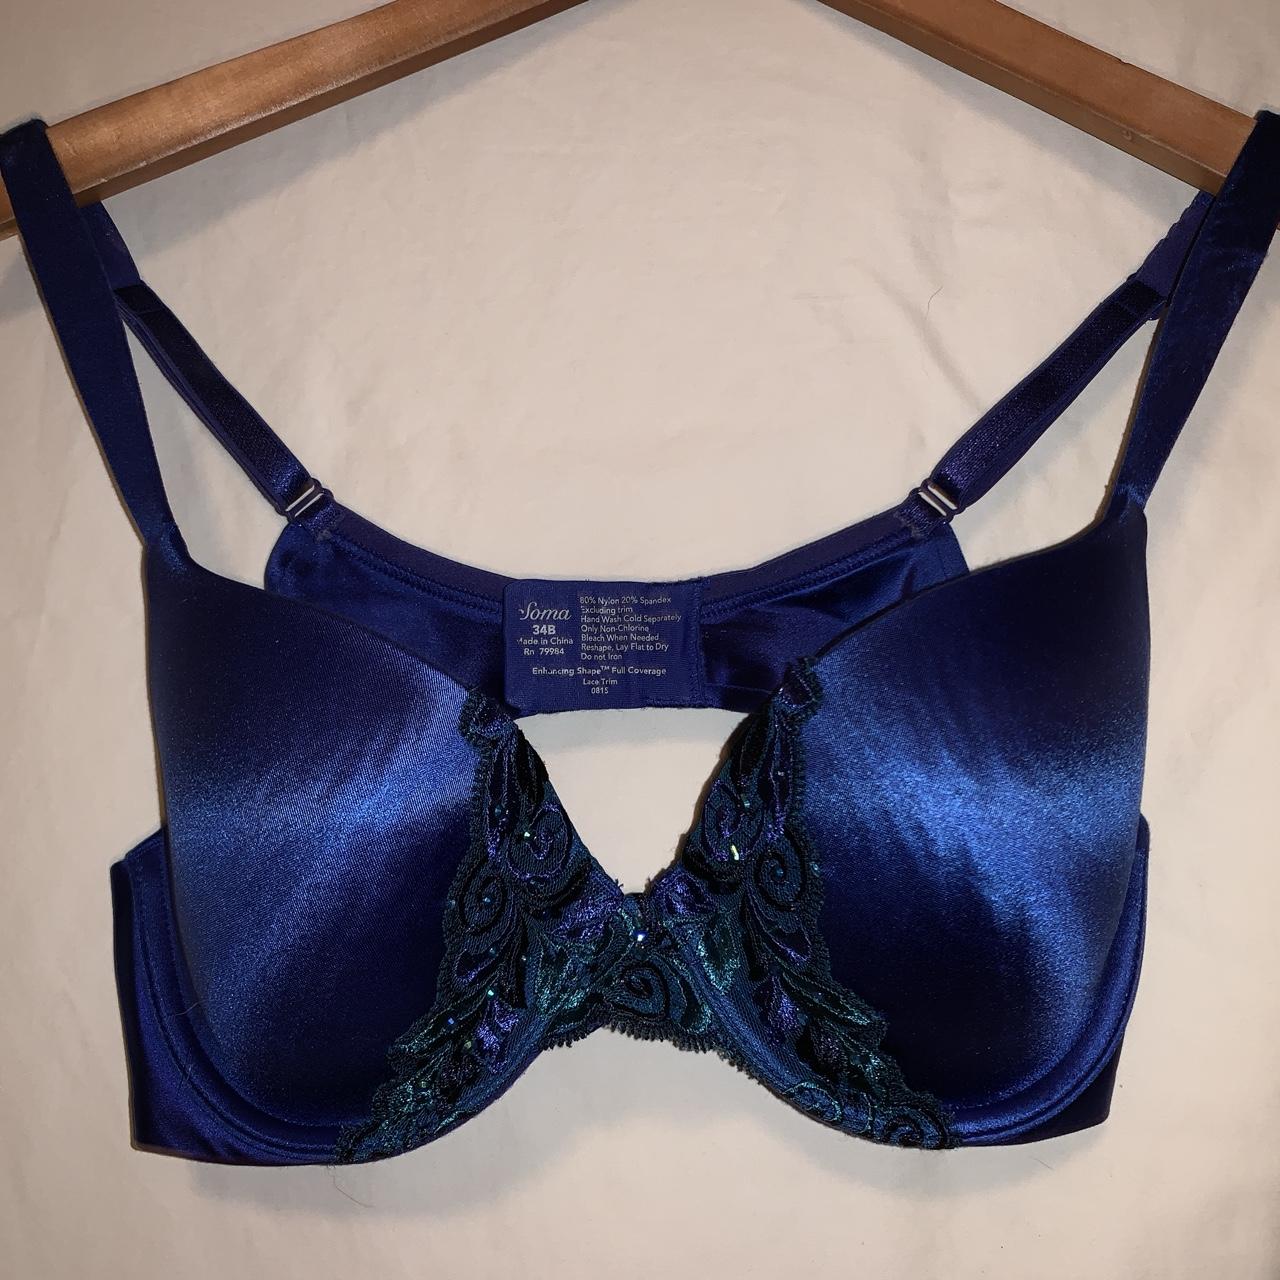 Soma 34B bra. Gorgeous royal blue color with peacock - Depop